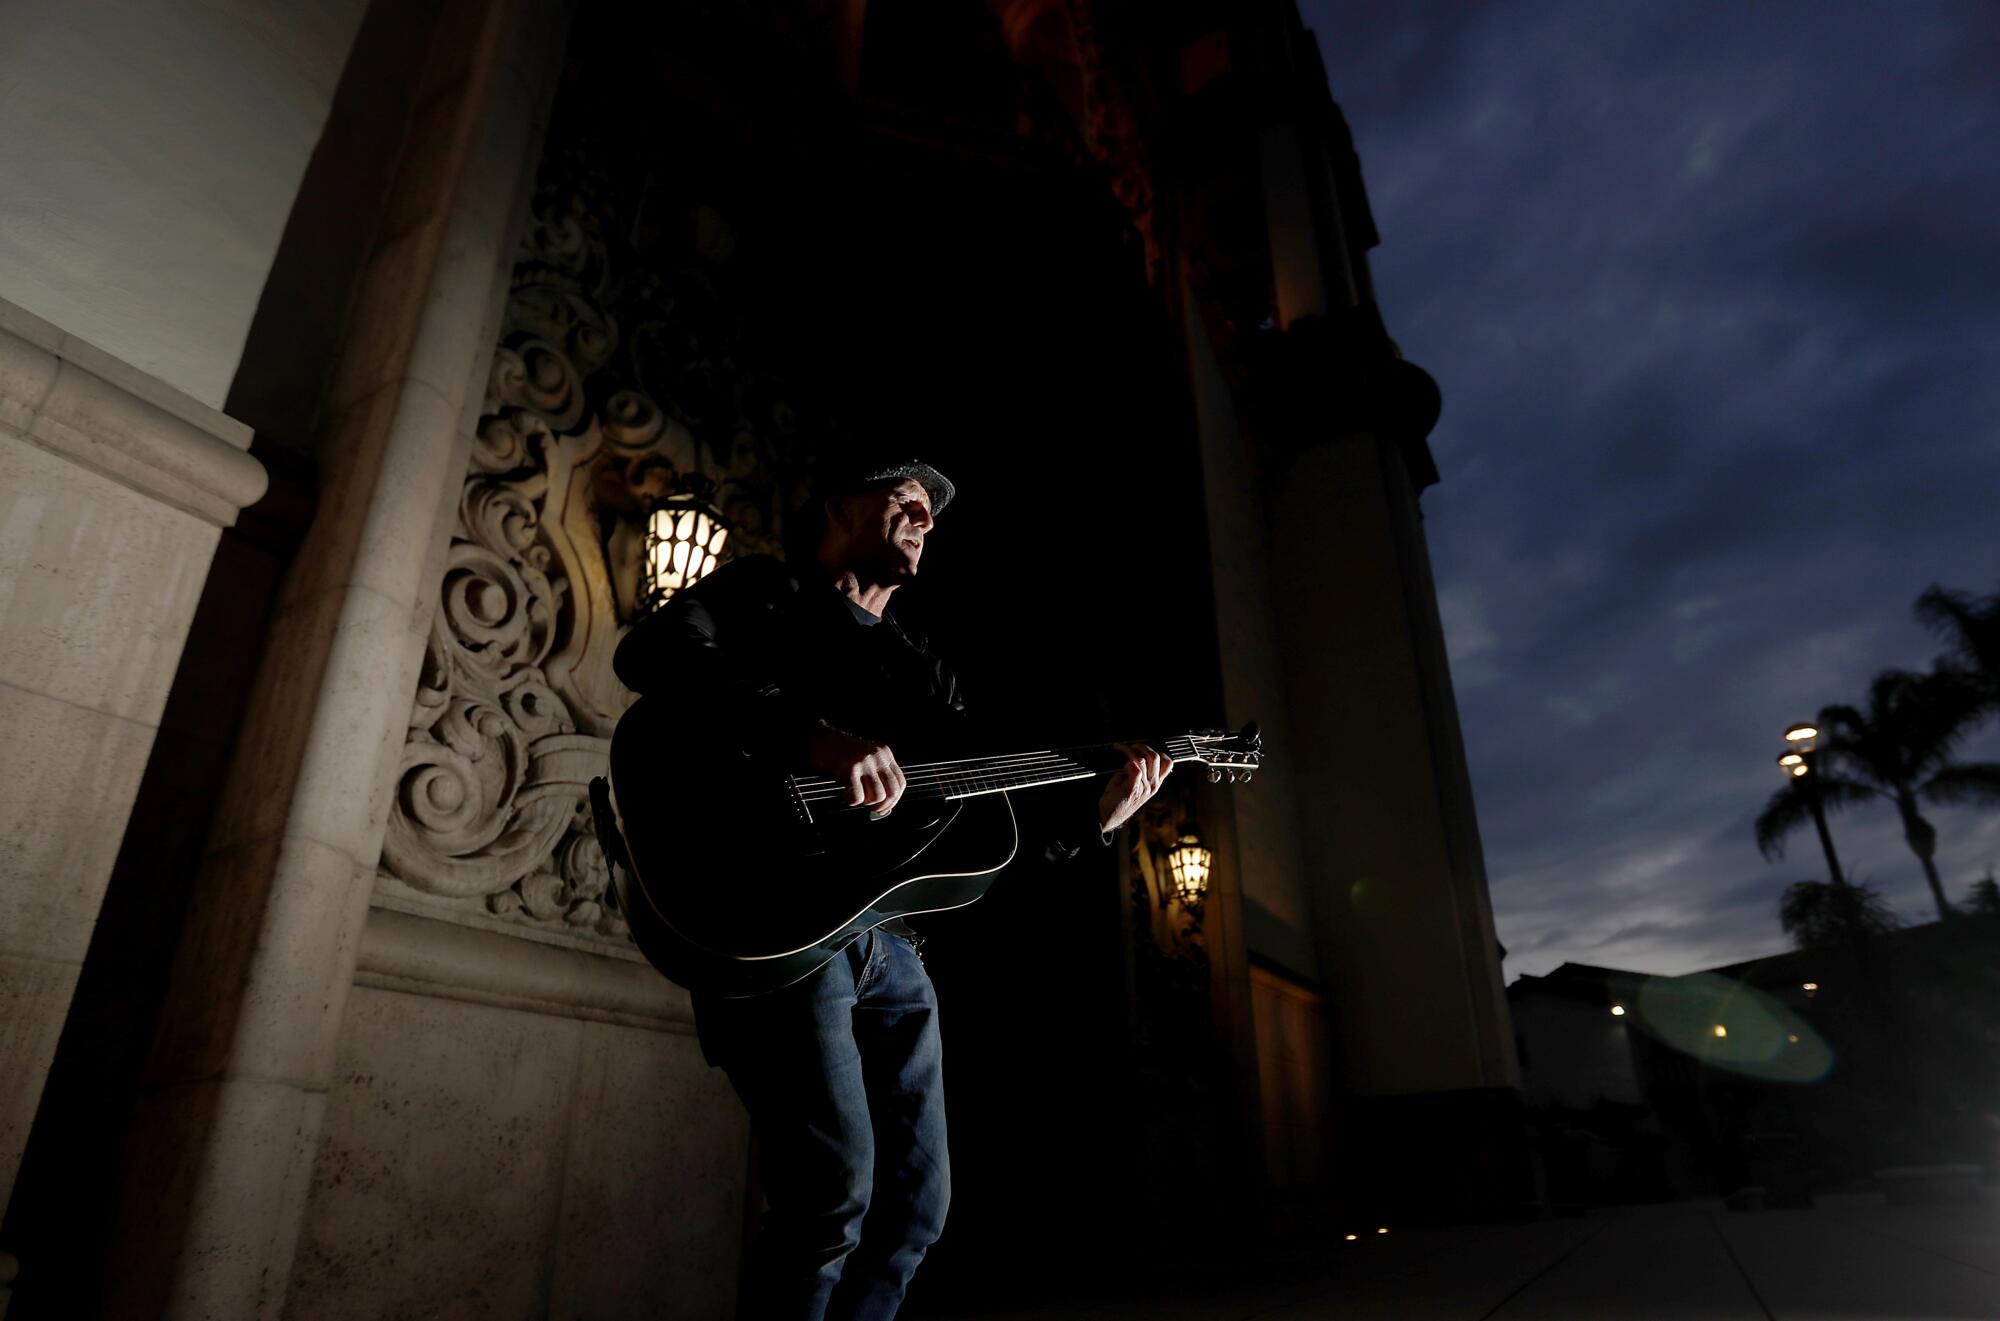 Gary Saint Germain plays guitar at dusk in front of St. Charles Borromeo Catholic Church in North Hollywood. In coronavirus lockdown with two roommates, Saint Germain, 58, recently started playing and singing outside the church to get fresh air and relieve boredom.